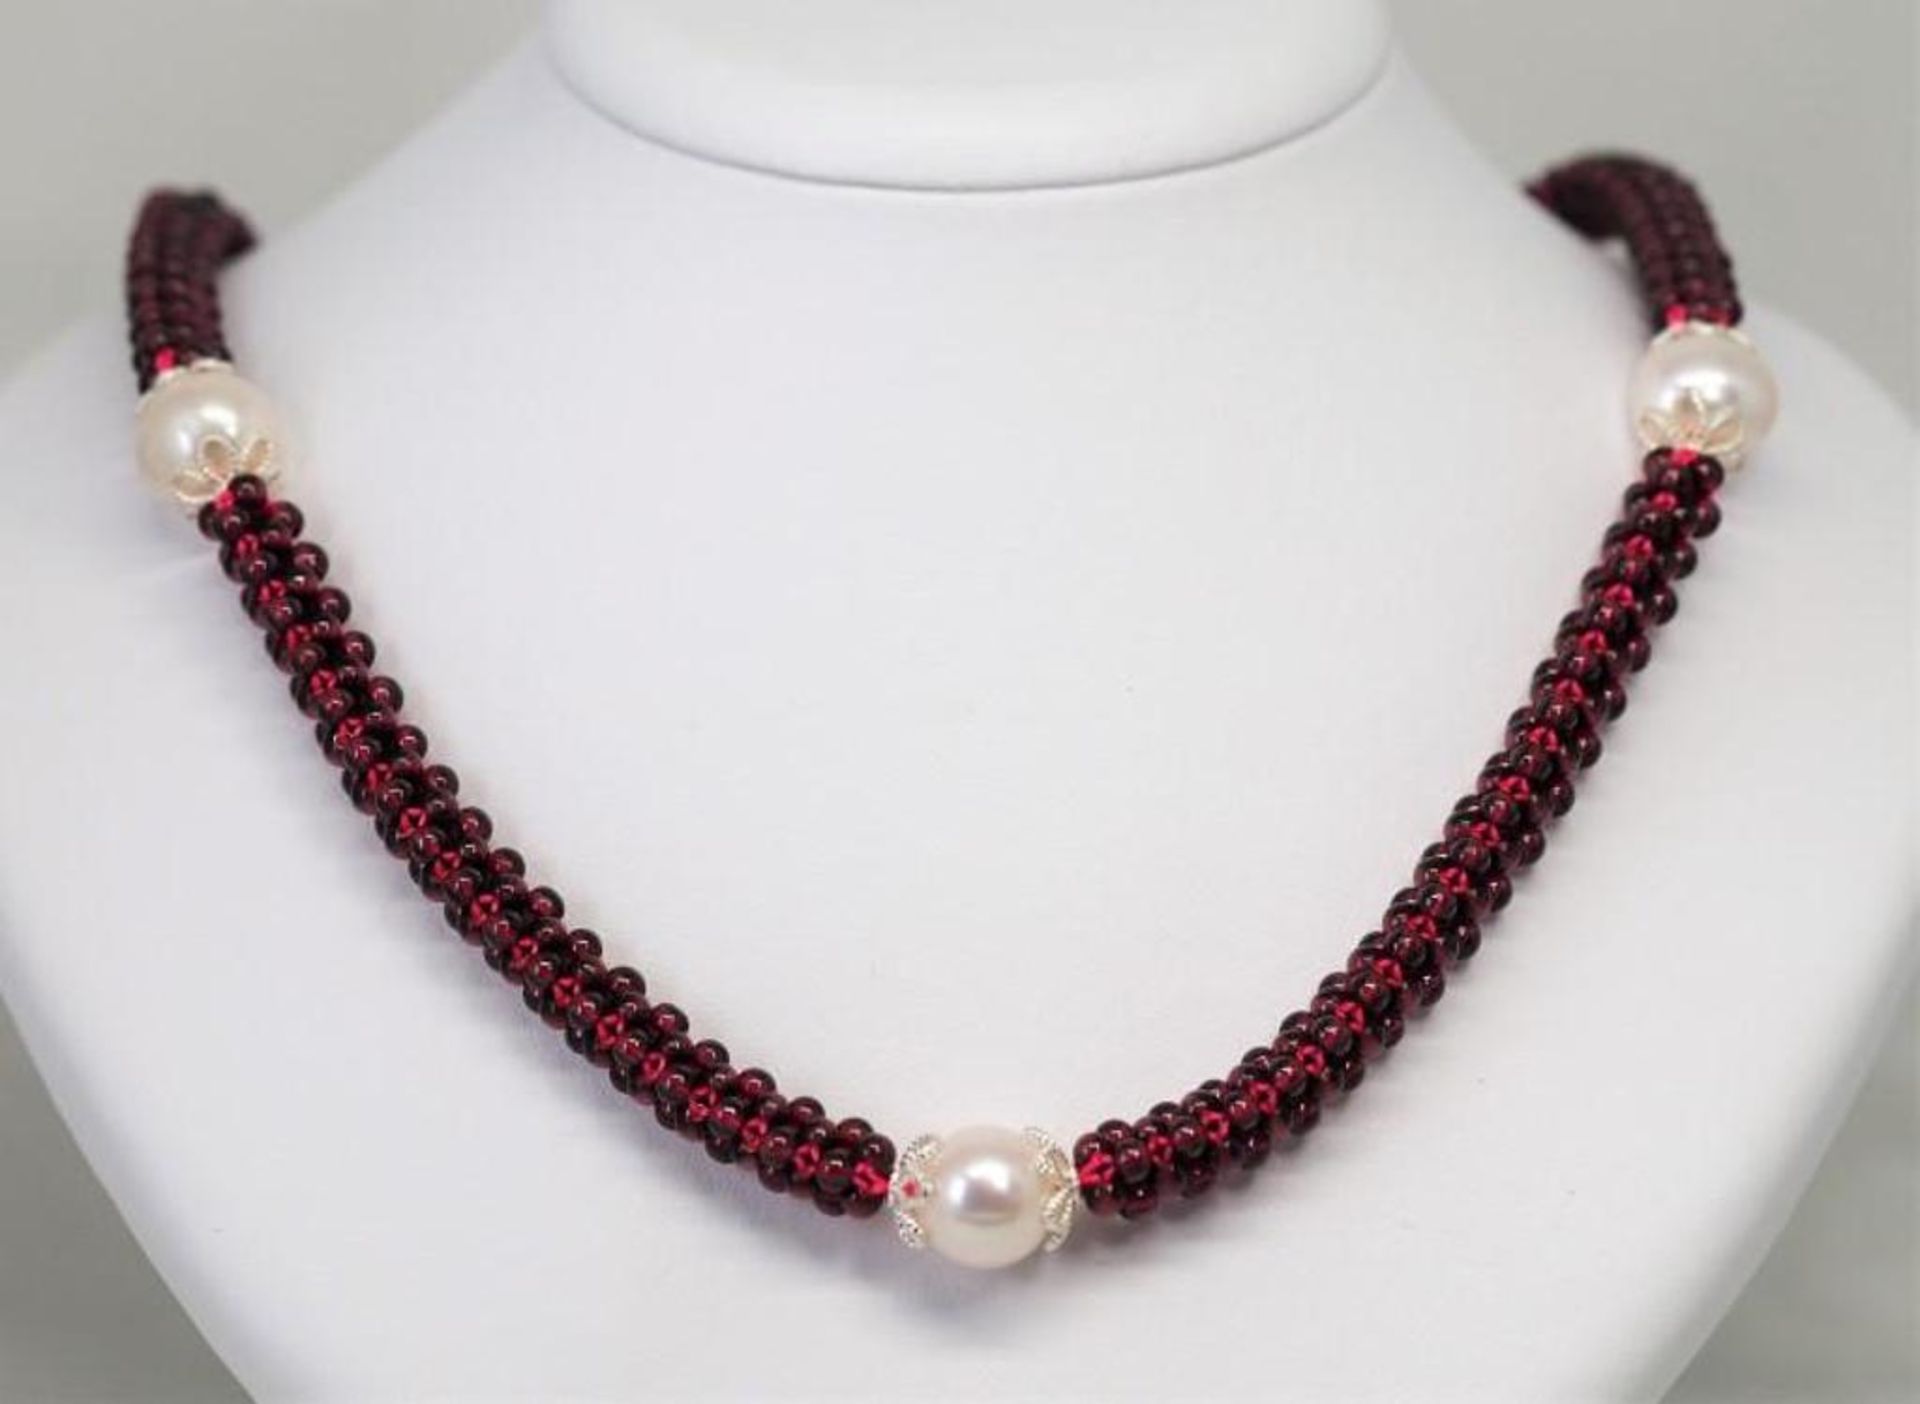 Sterling Silver Garnet Gemstone & Pearl Necklace (January Birthstone), Insurance Value $900 - Image 2 of 3